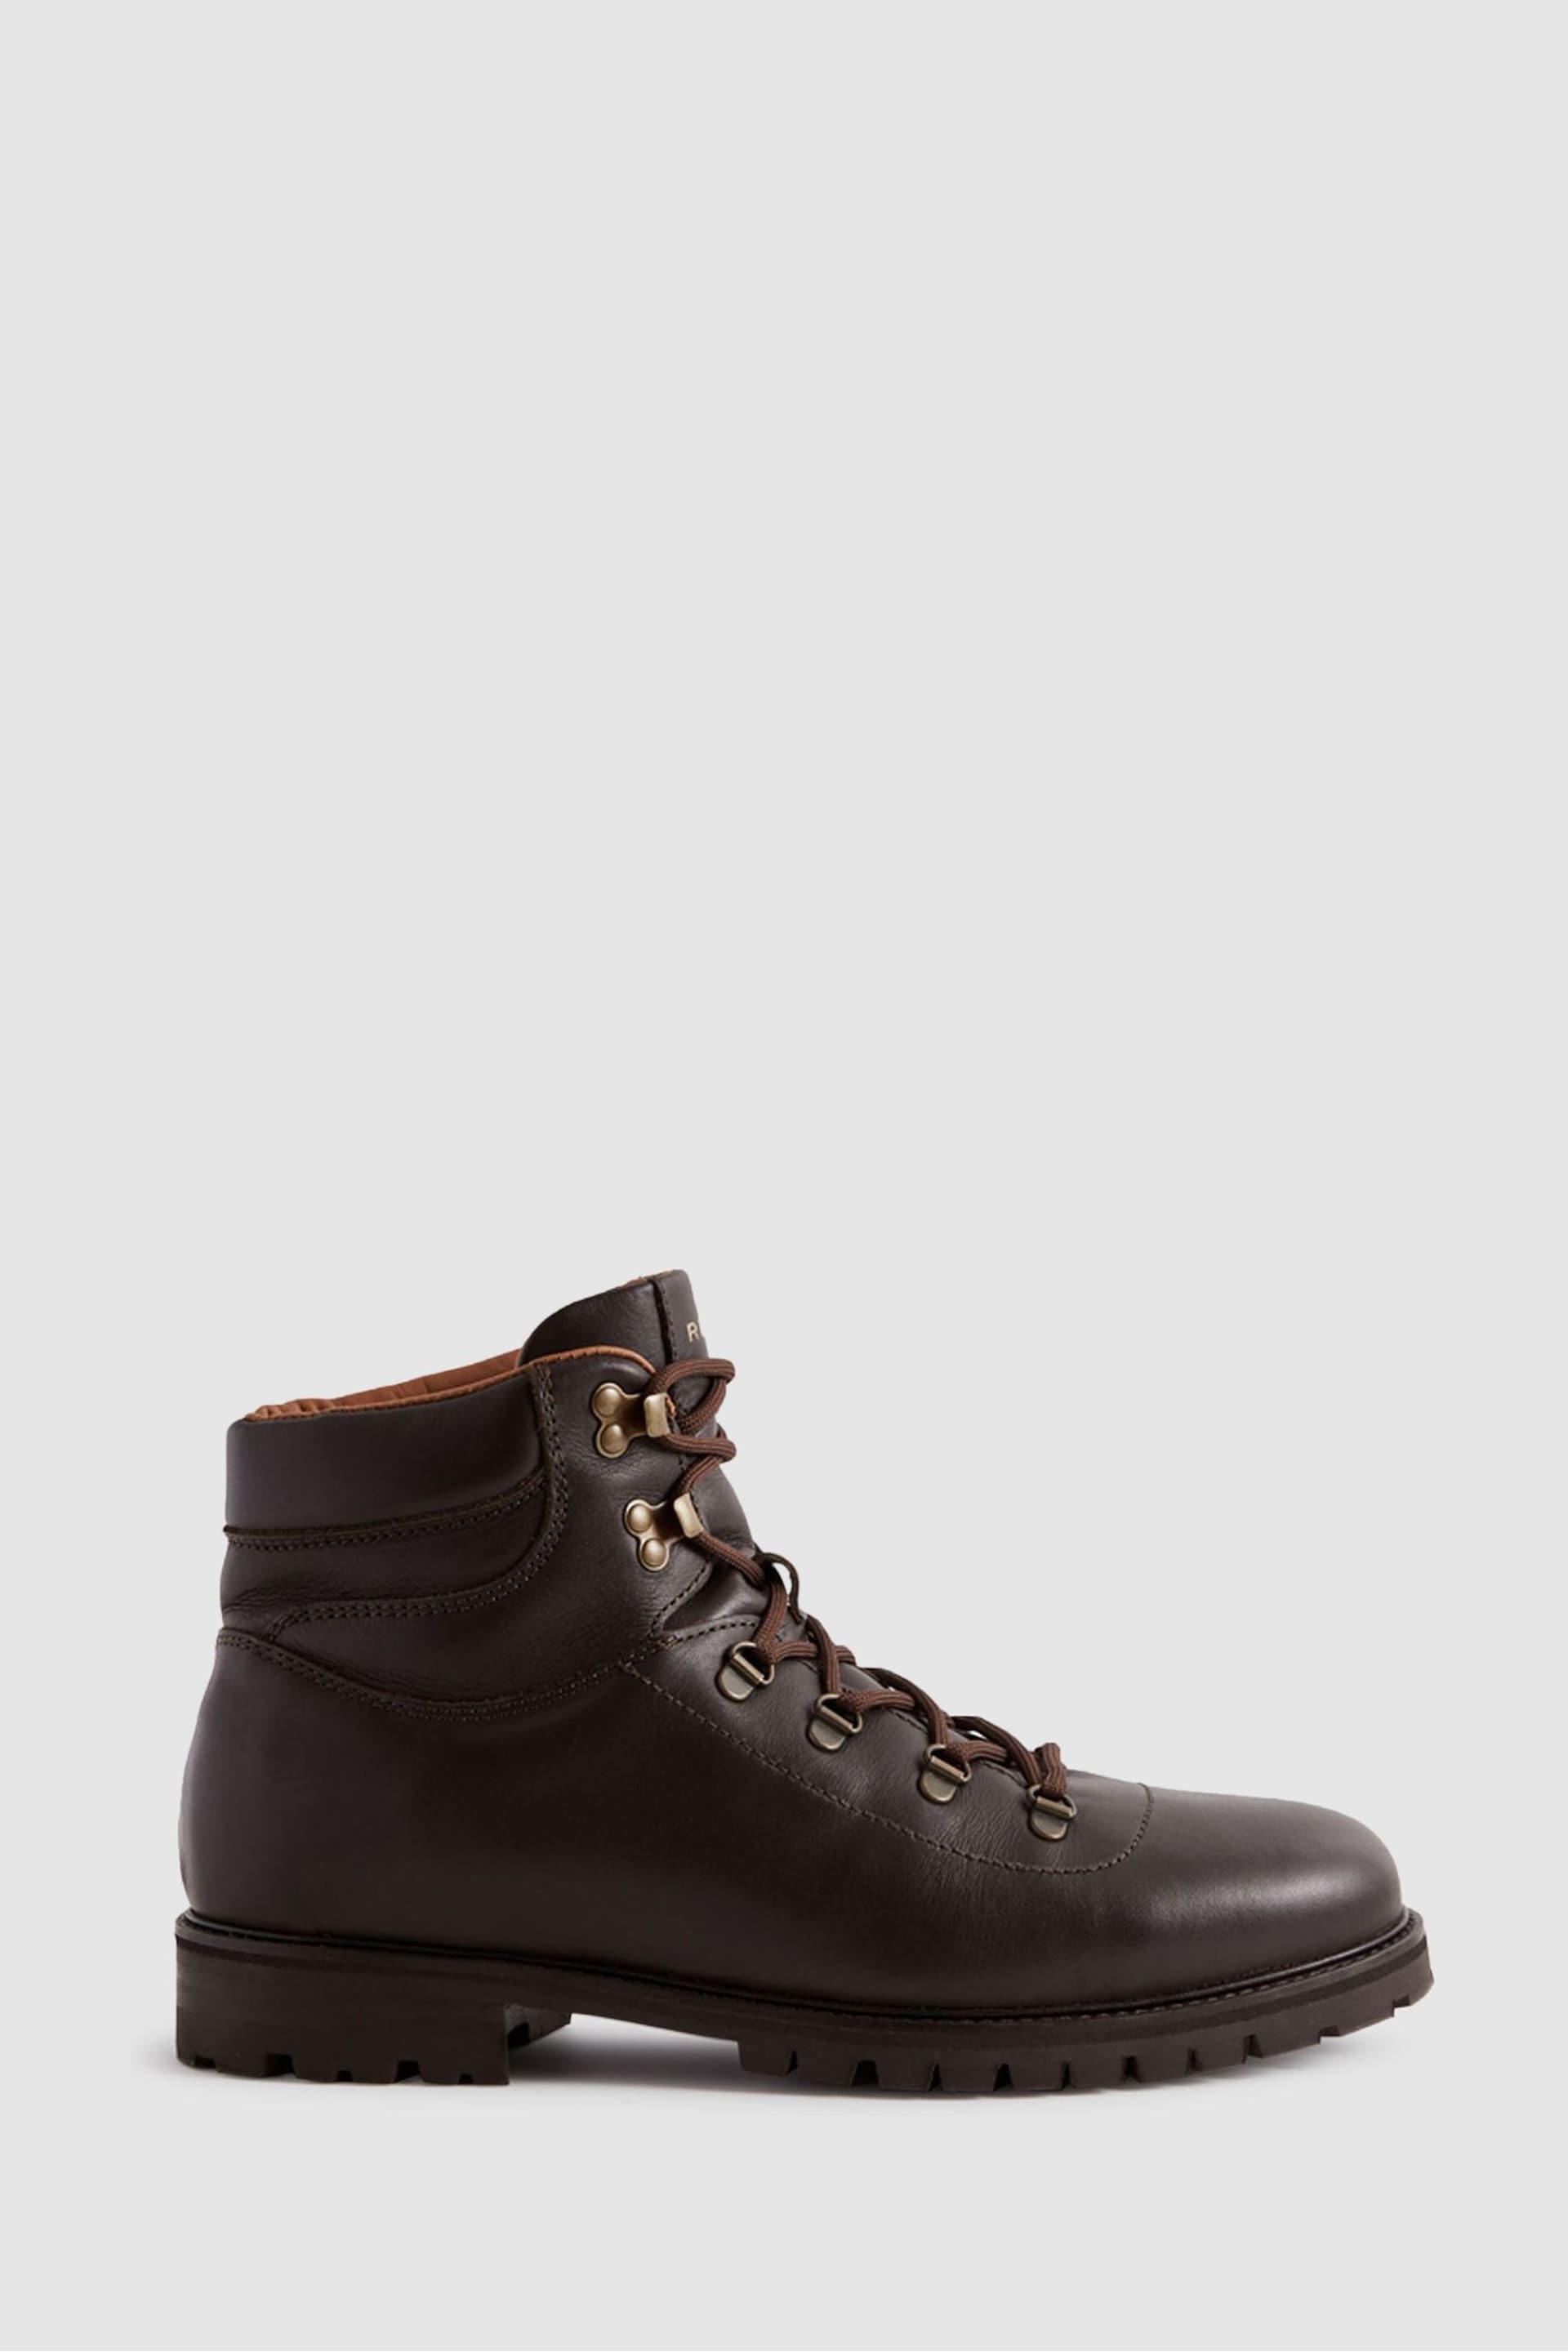 Reiss Dark Brown Ashdown Leather Hiking Boots - Image 1 of 5